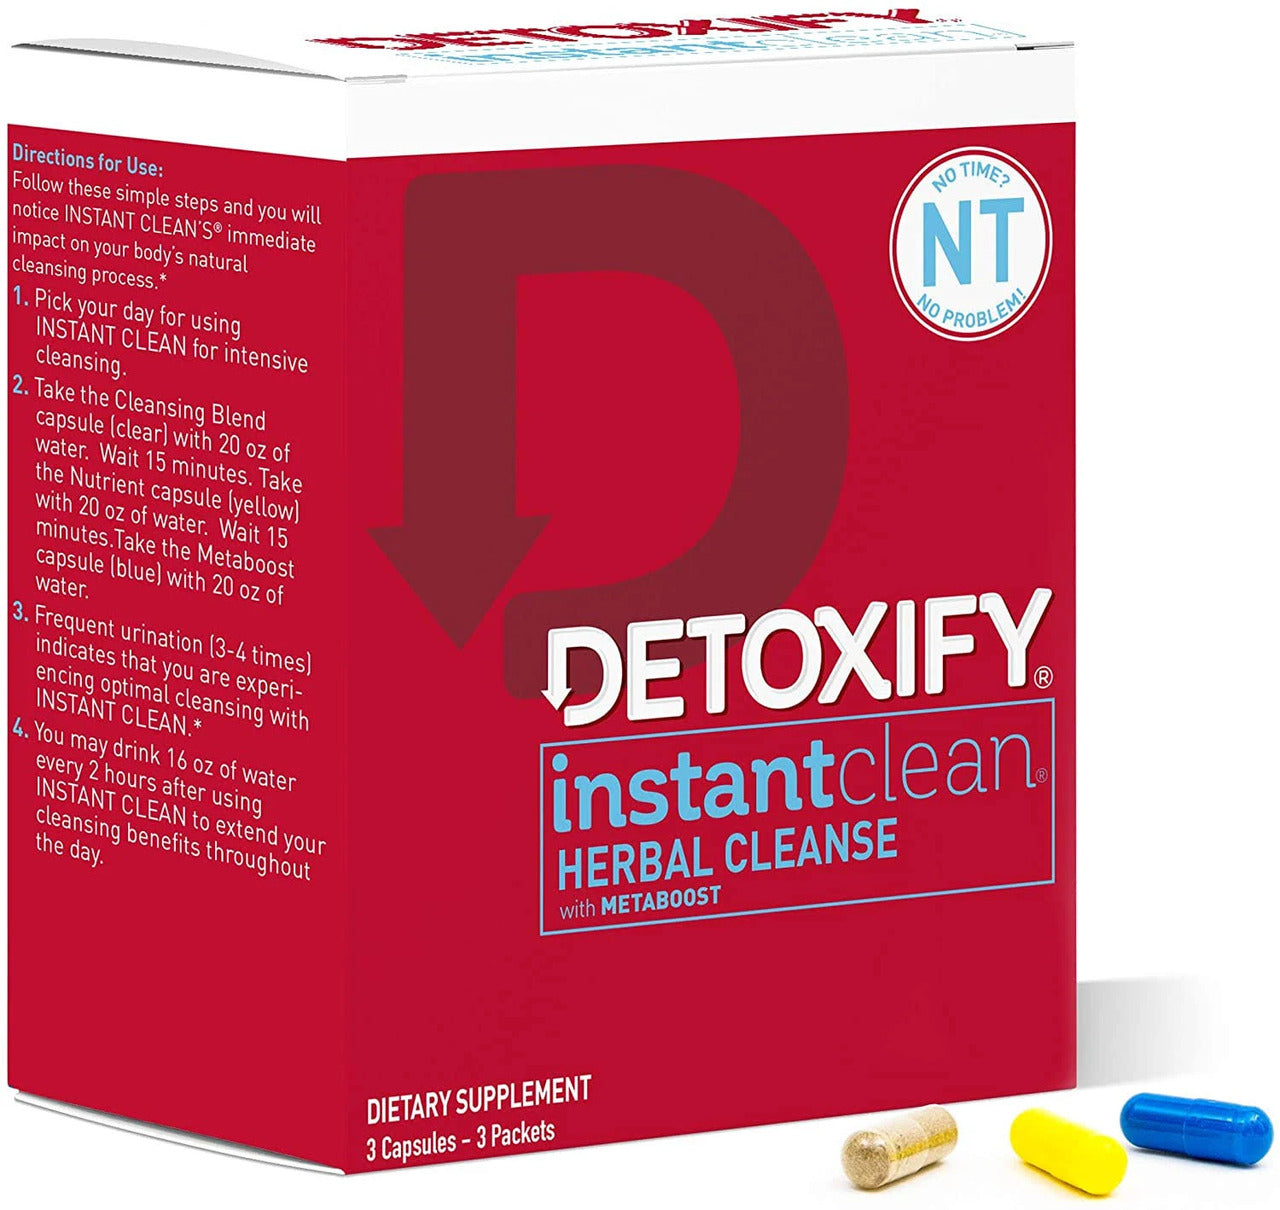 Detoxify Instant Clean Herbal Cleanse Unflavored 3 Capsules